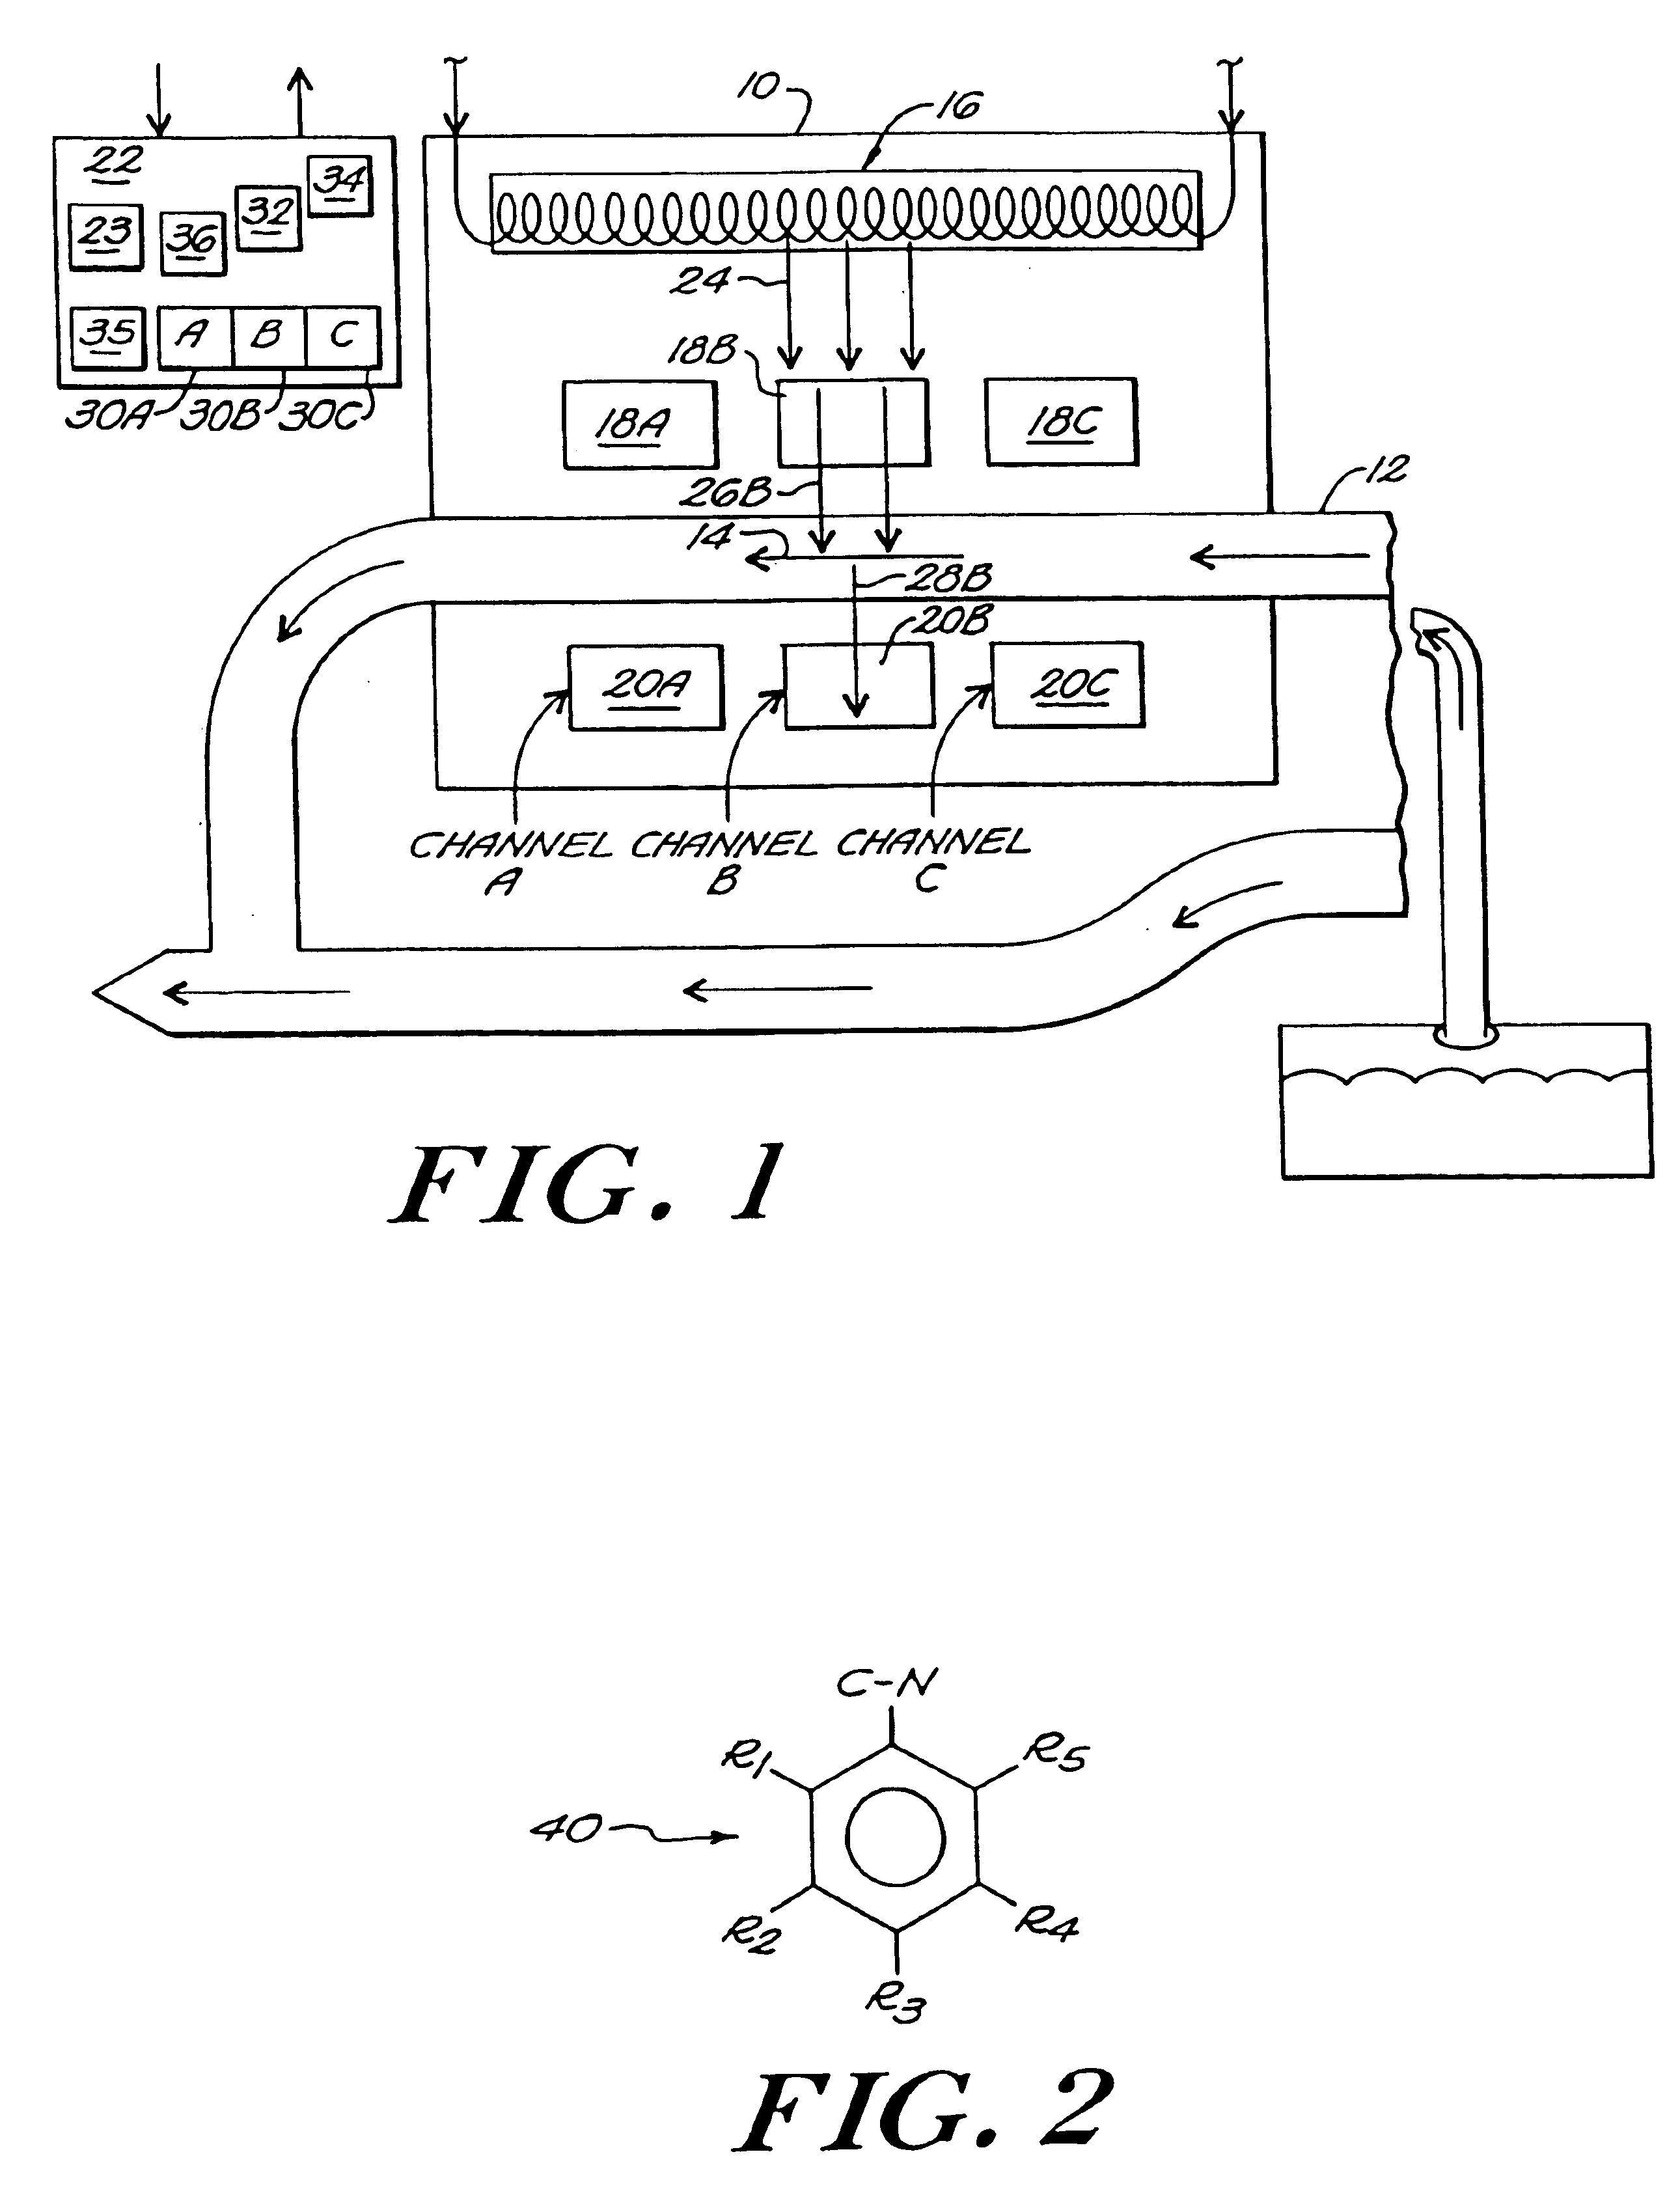 Apparatus for marking and identifying liquids